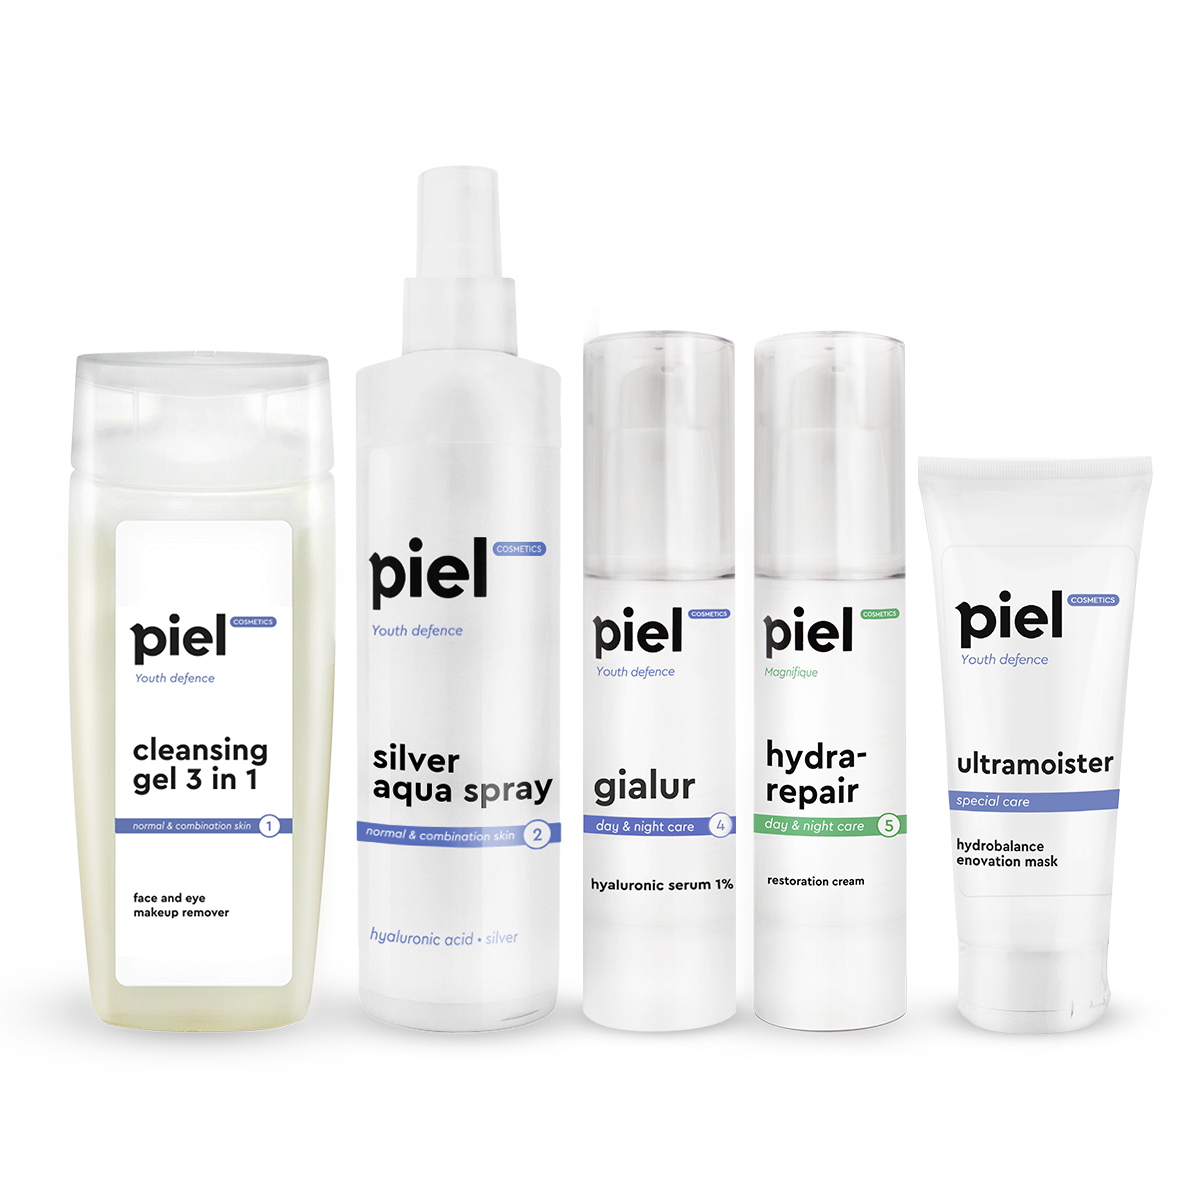 Intensive moisturizing care for all skin types